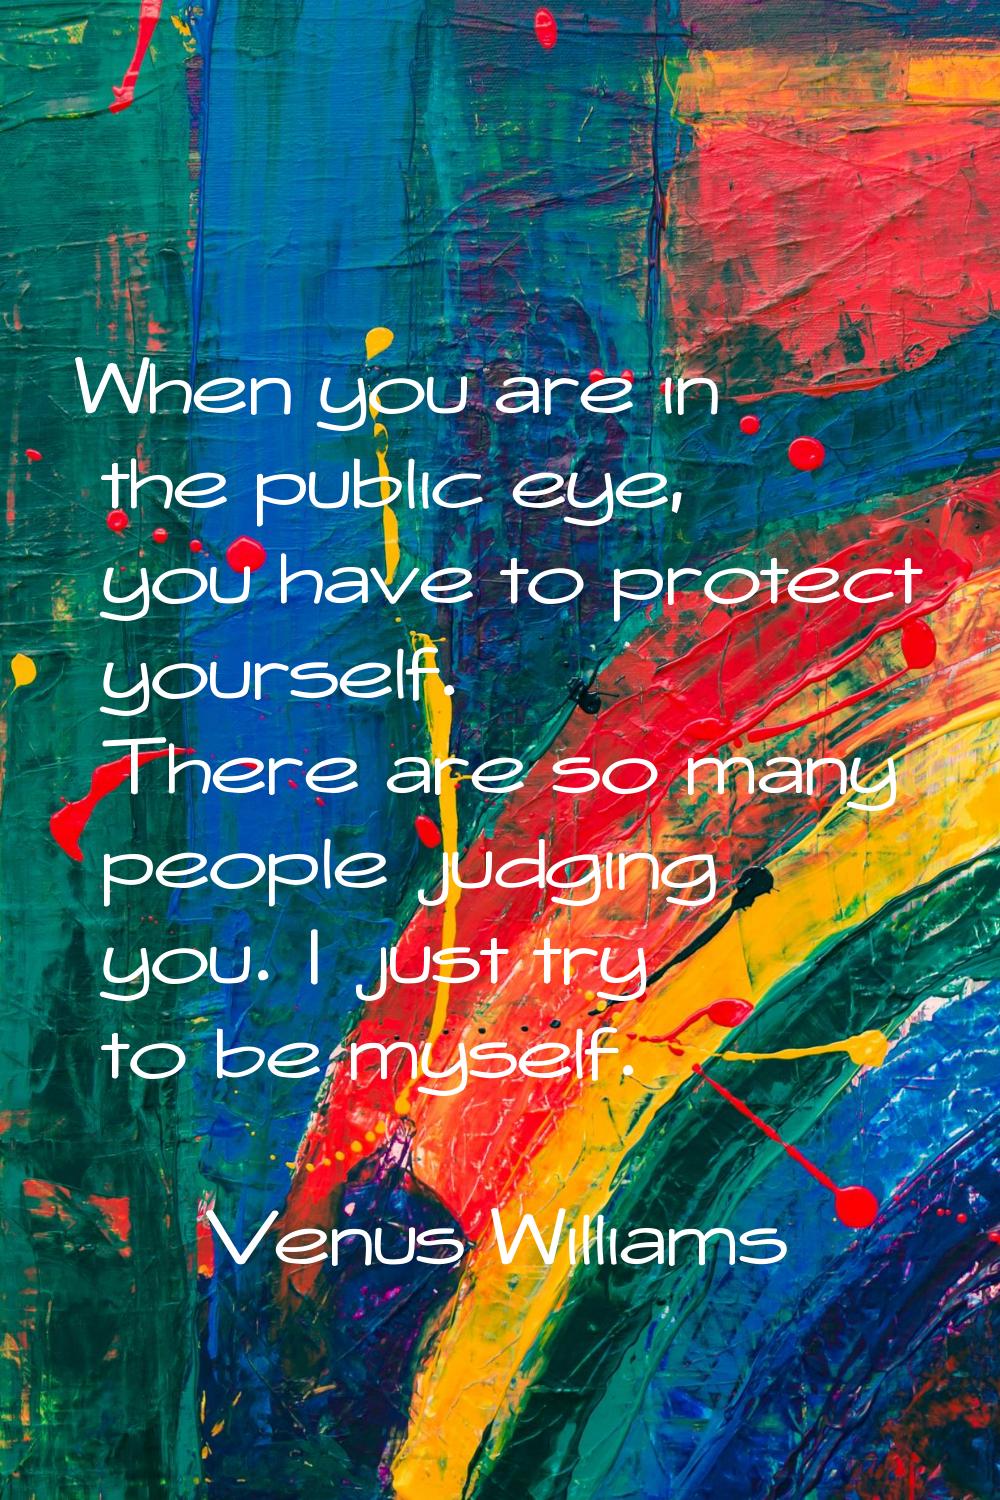 When you are in the public eye, you have to protect yourself. There are so many people judging you.